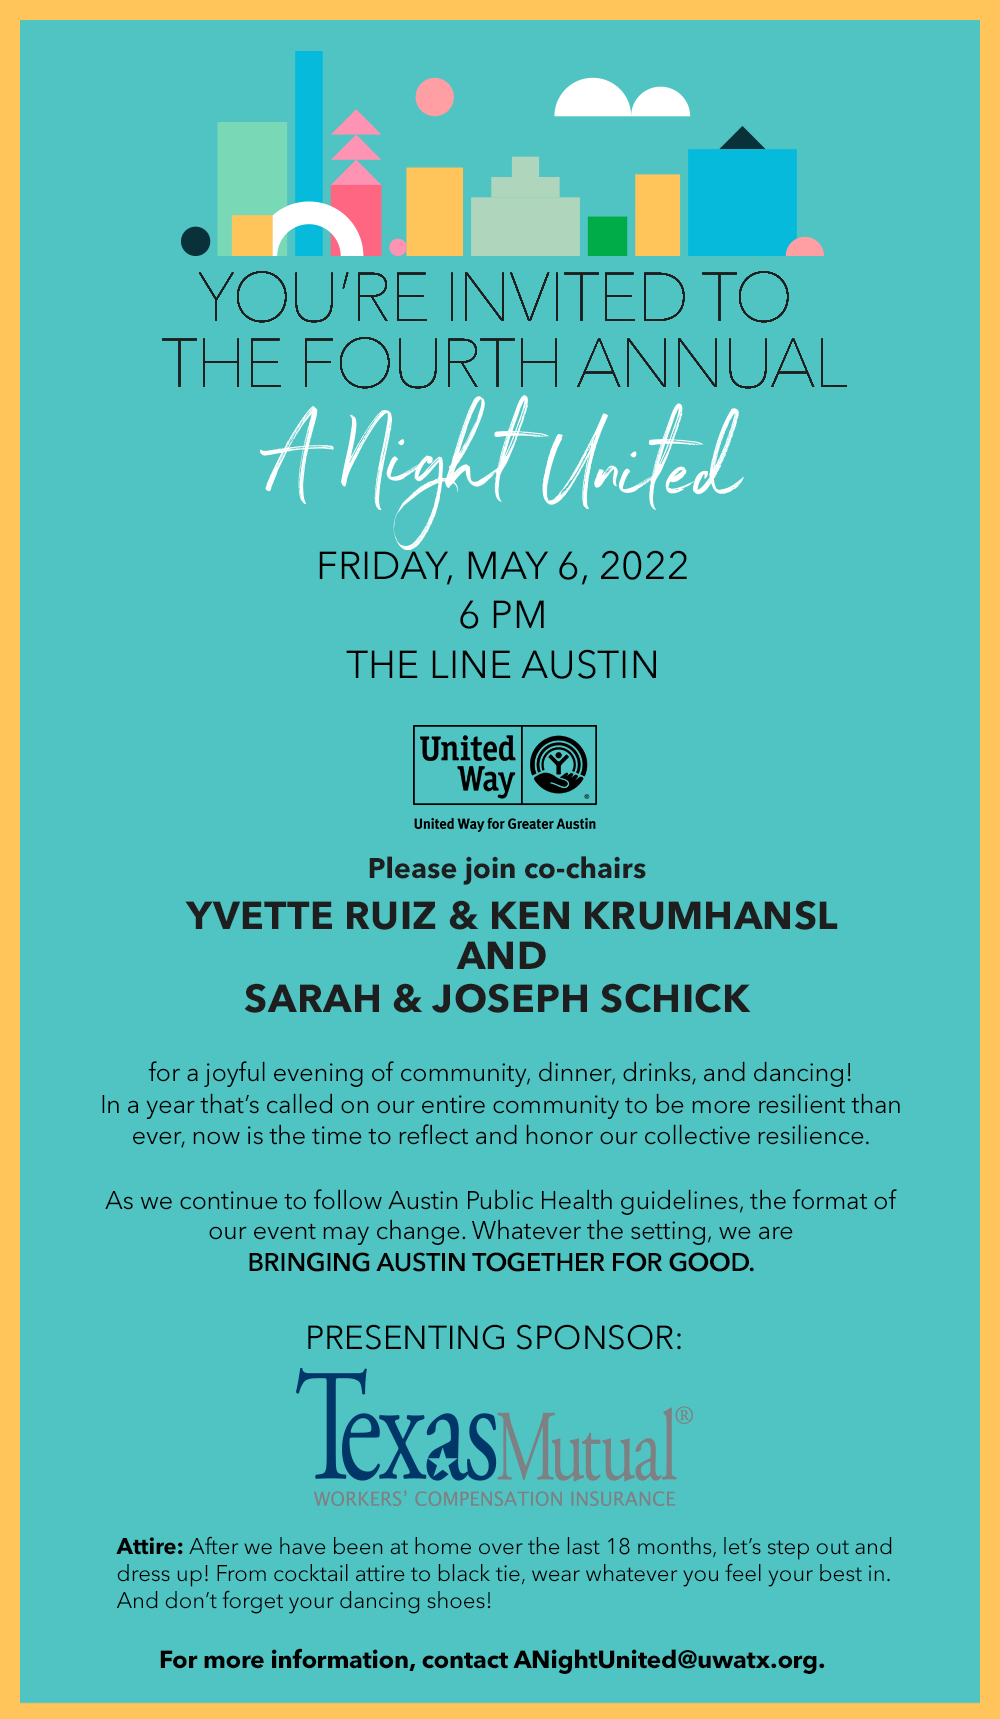 You're invited to the fourth annual A Night United on Friday May 6, 6 PM at the Line Austin.